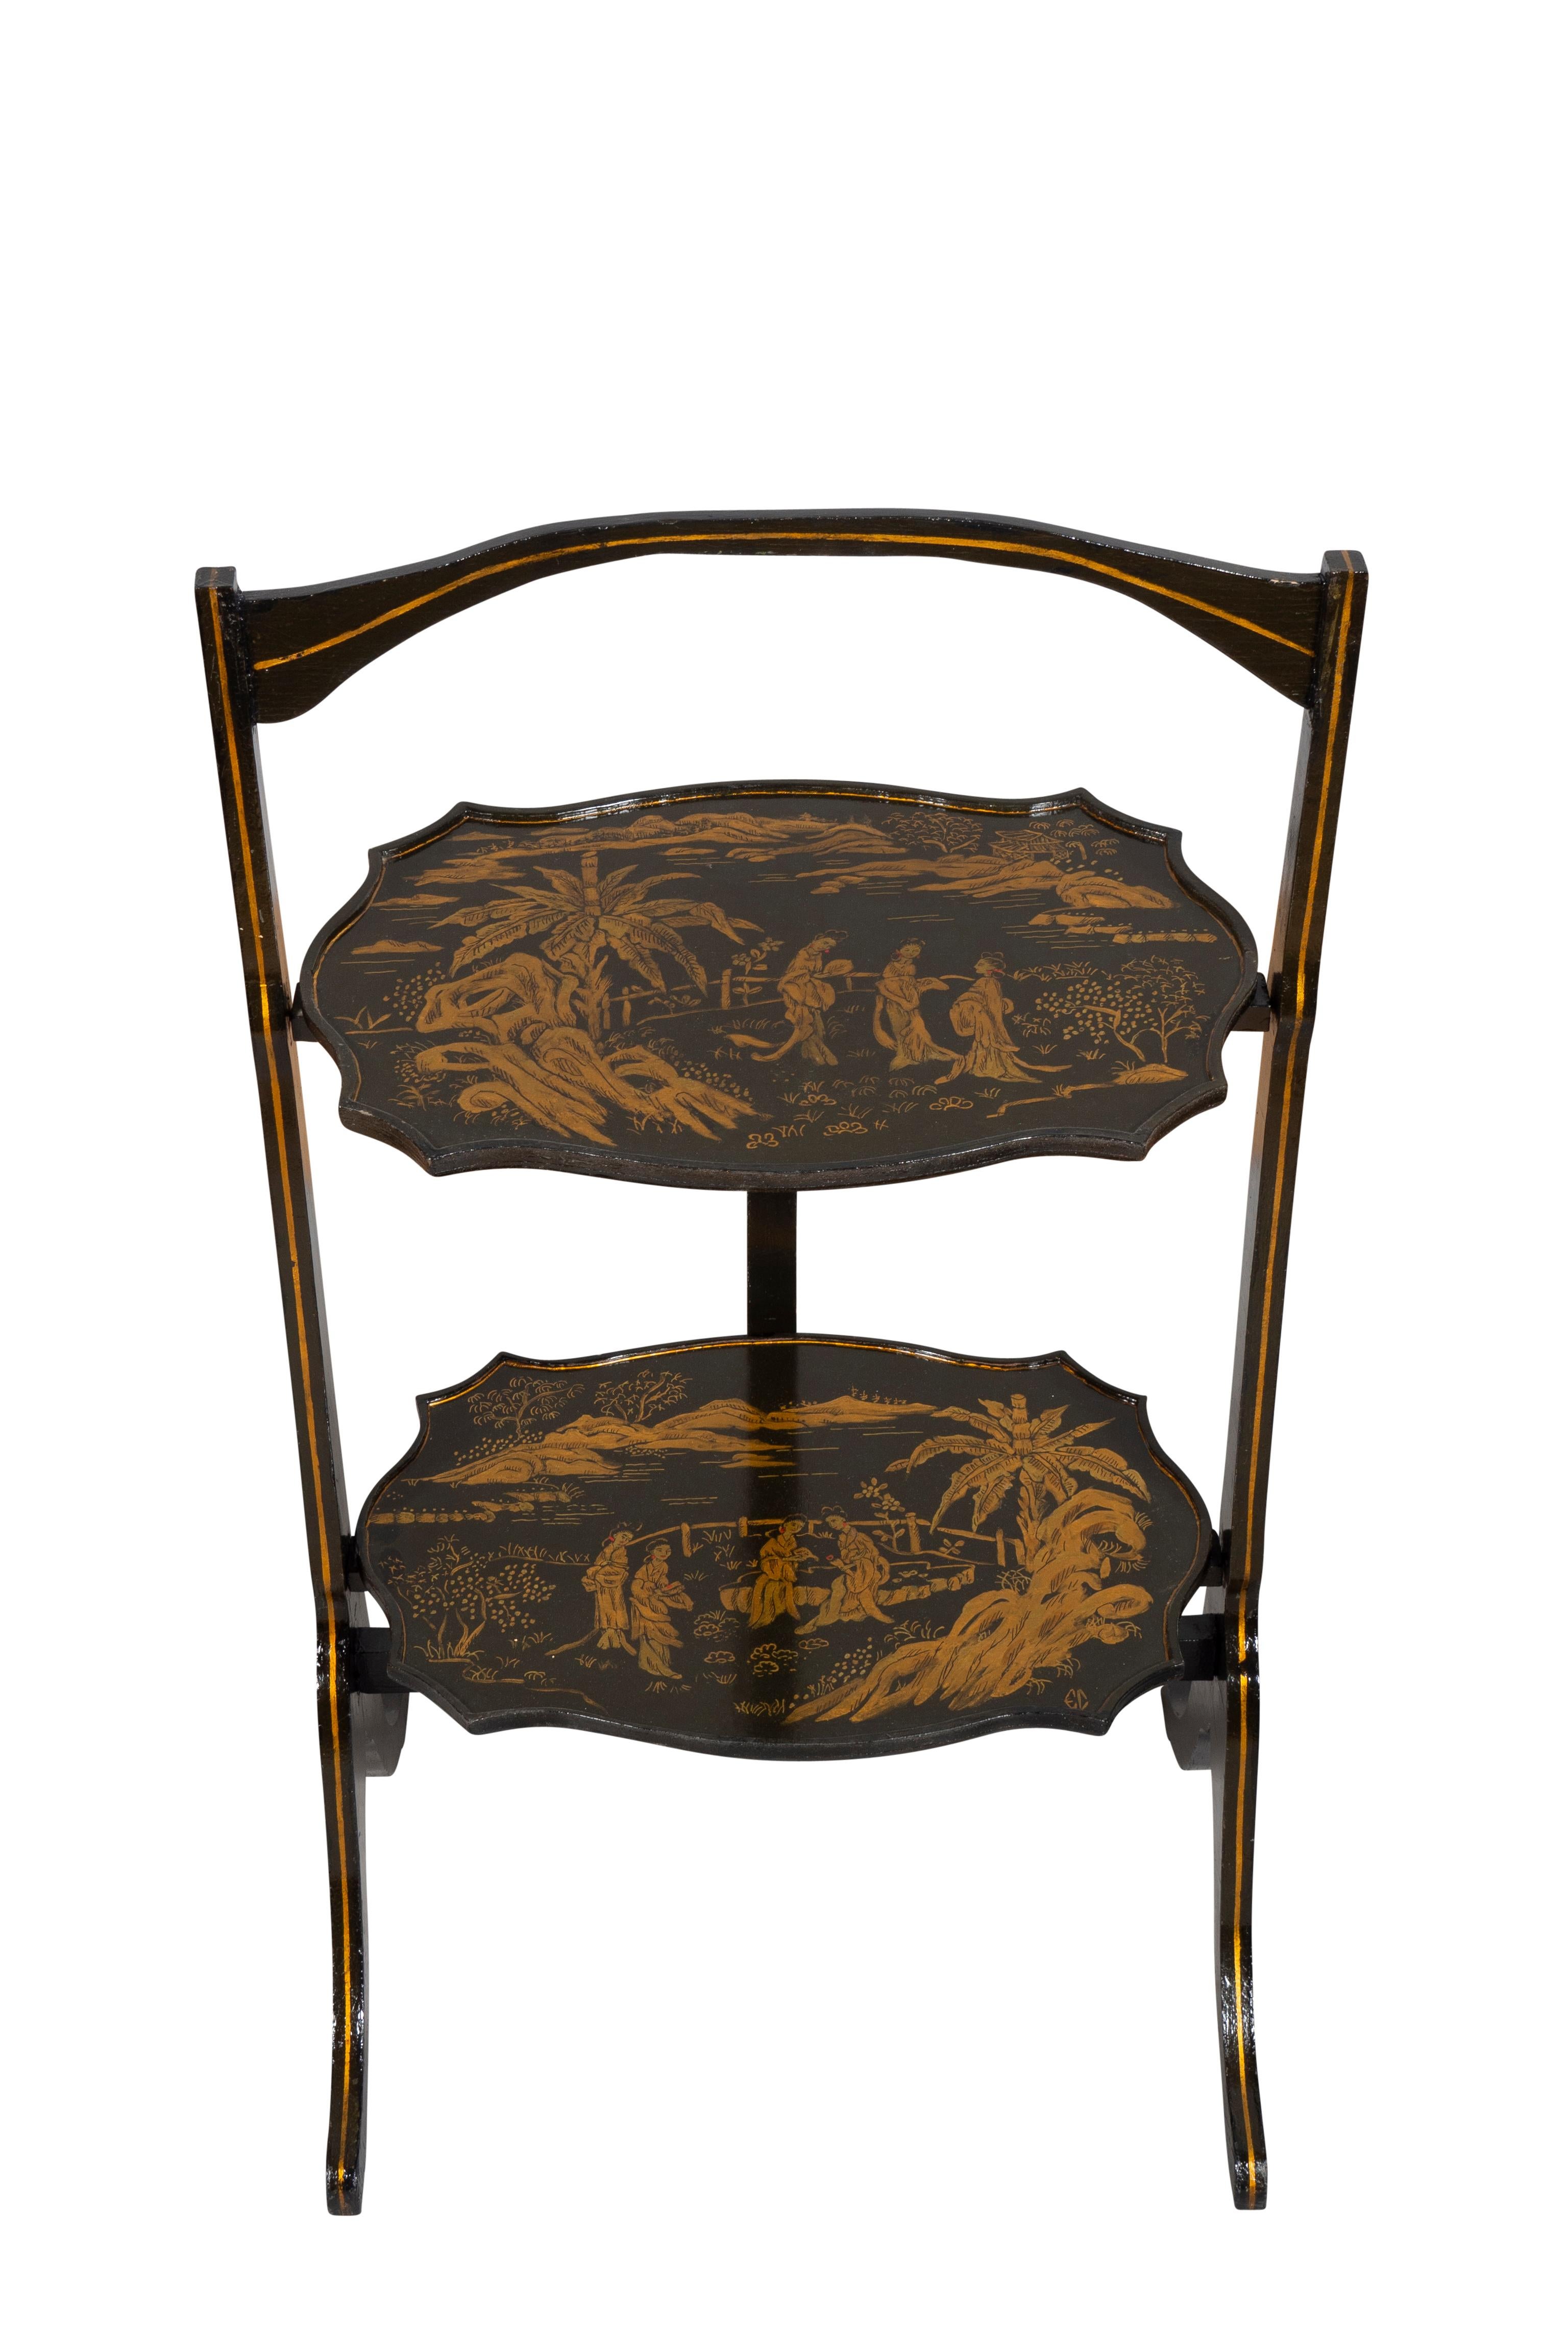 Early 20th Century Regency Style Chinoiserie Folding Table For Sale